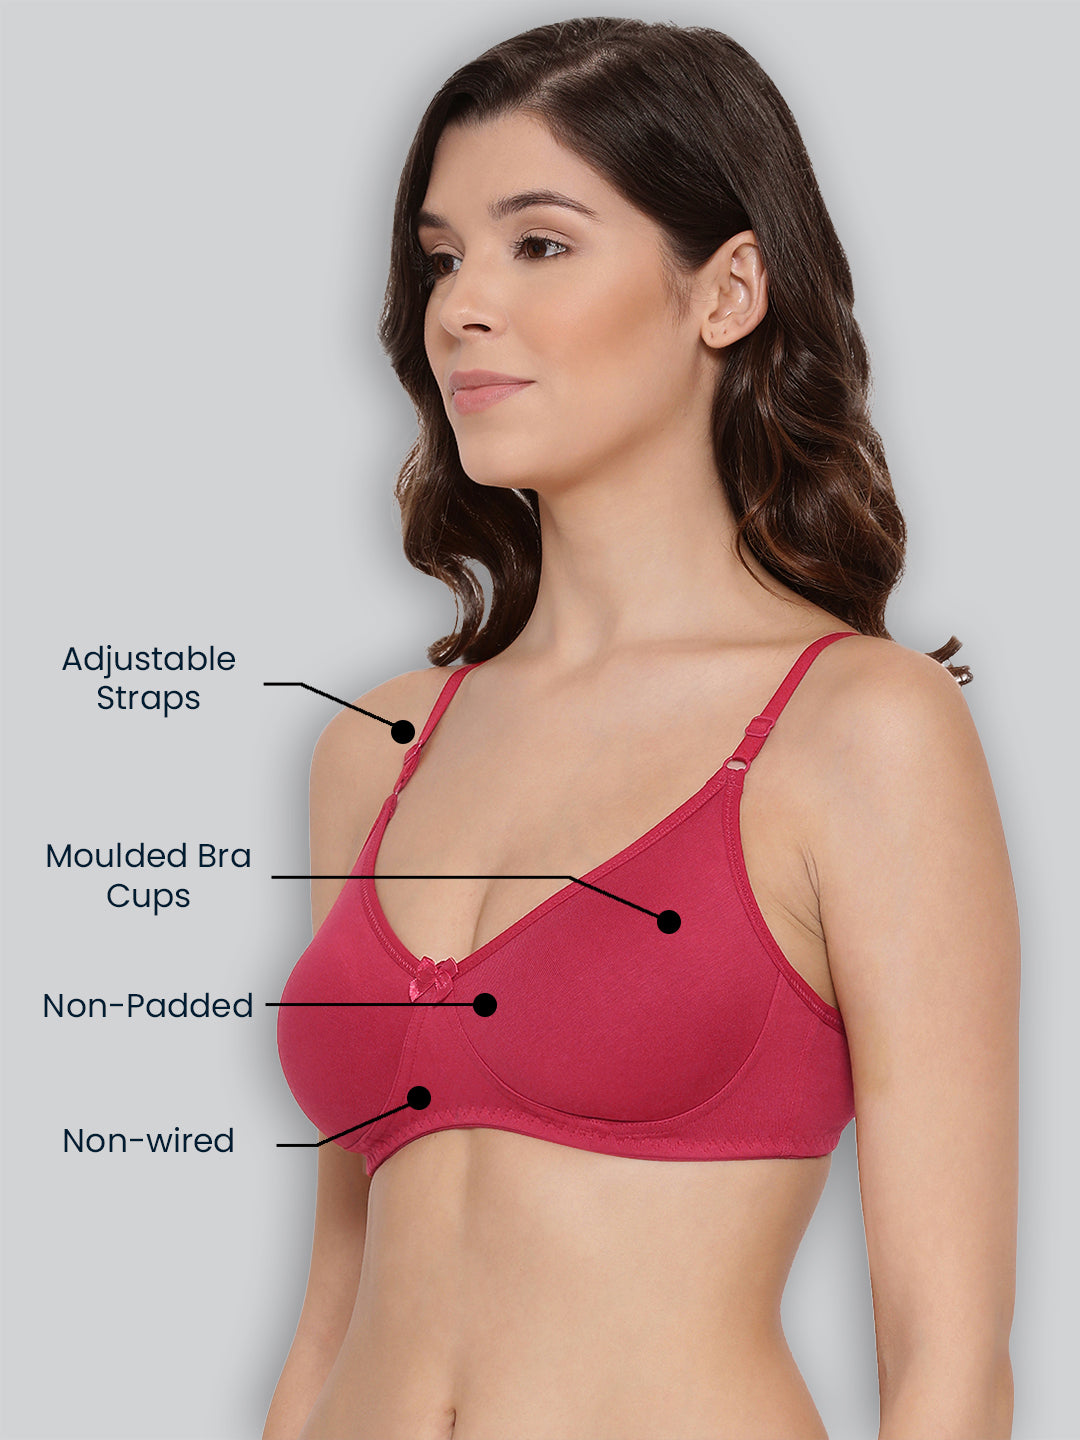 Lyra Margaret T-Shirt Bra (30-36) in Kanpur at best price by A And A  Collection - Justdial